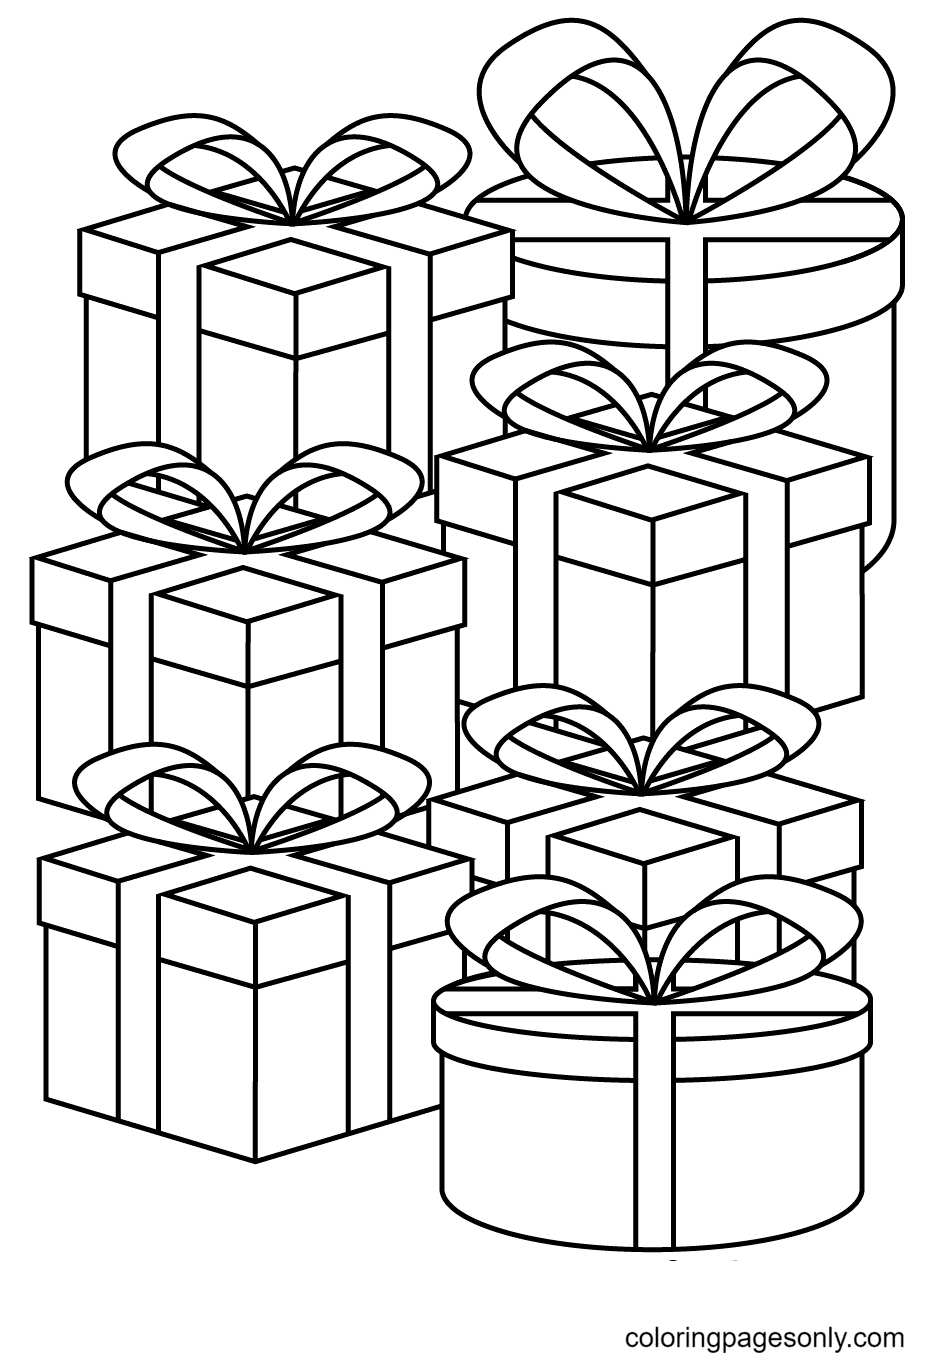 Lovely Xmas Gifts Coloring Page